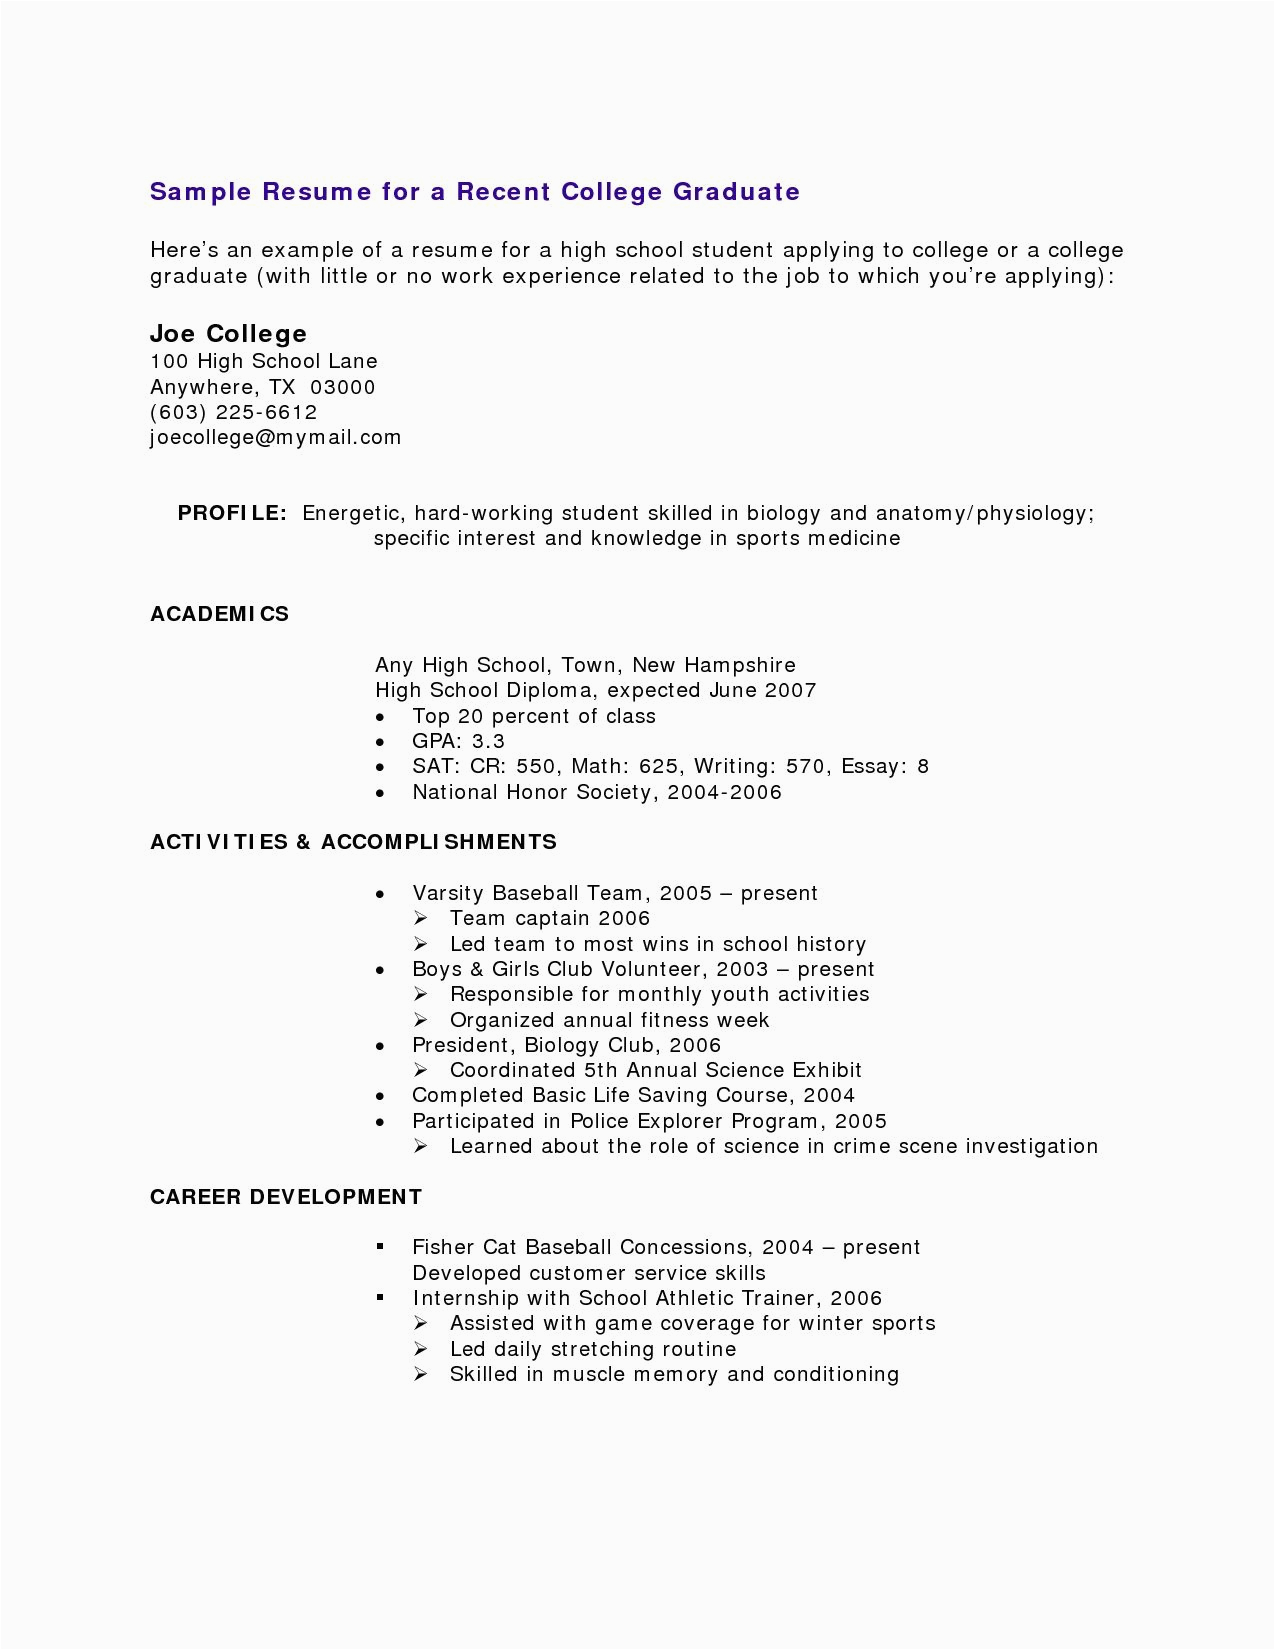 High School Graduate Resume Template No Experience High School Student Resume with No Work Experience Resume